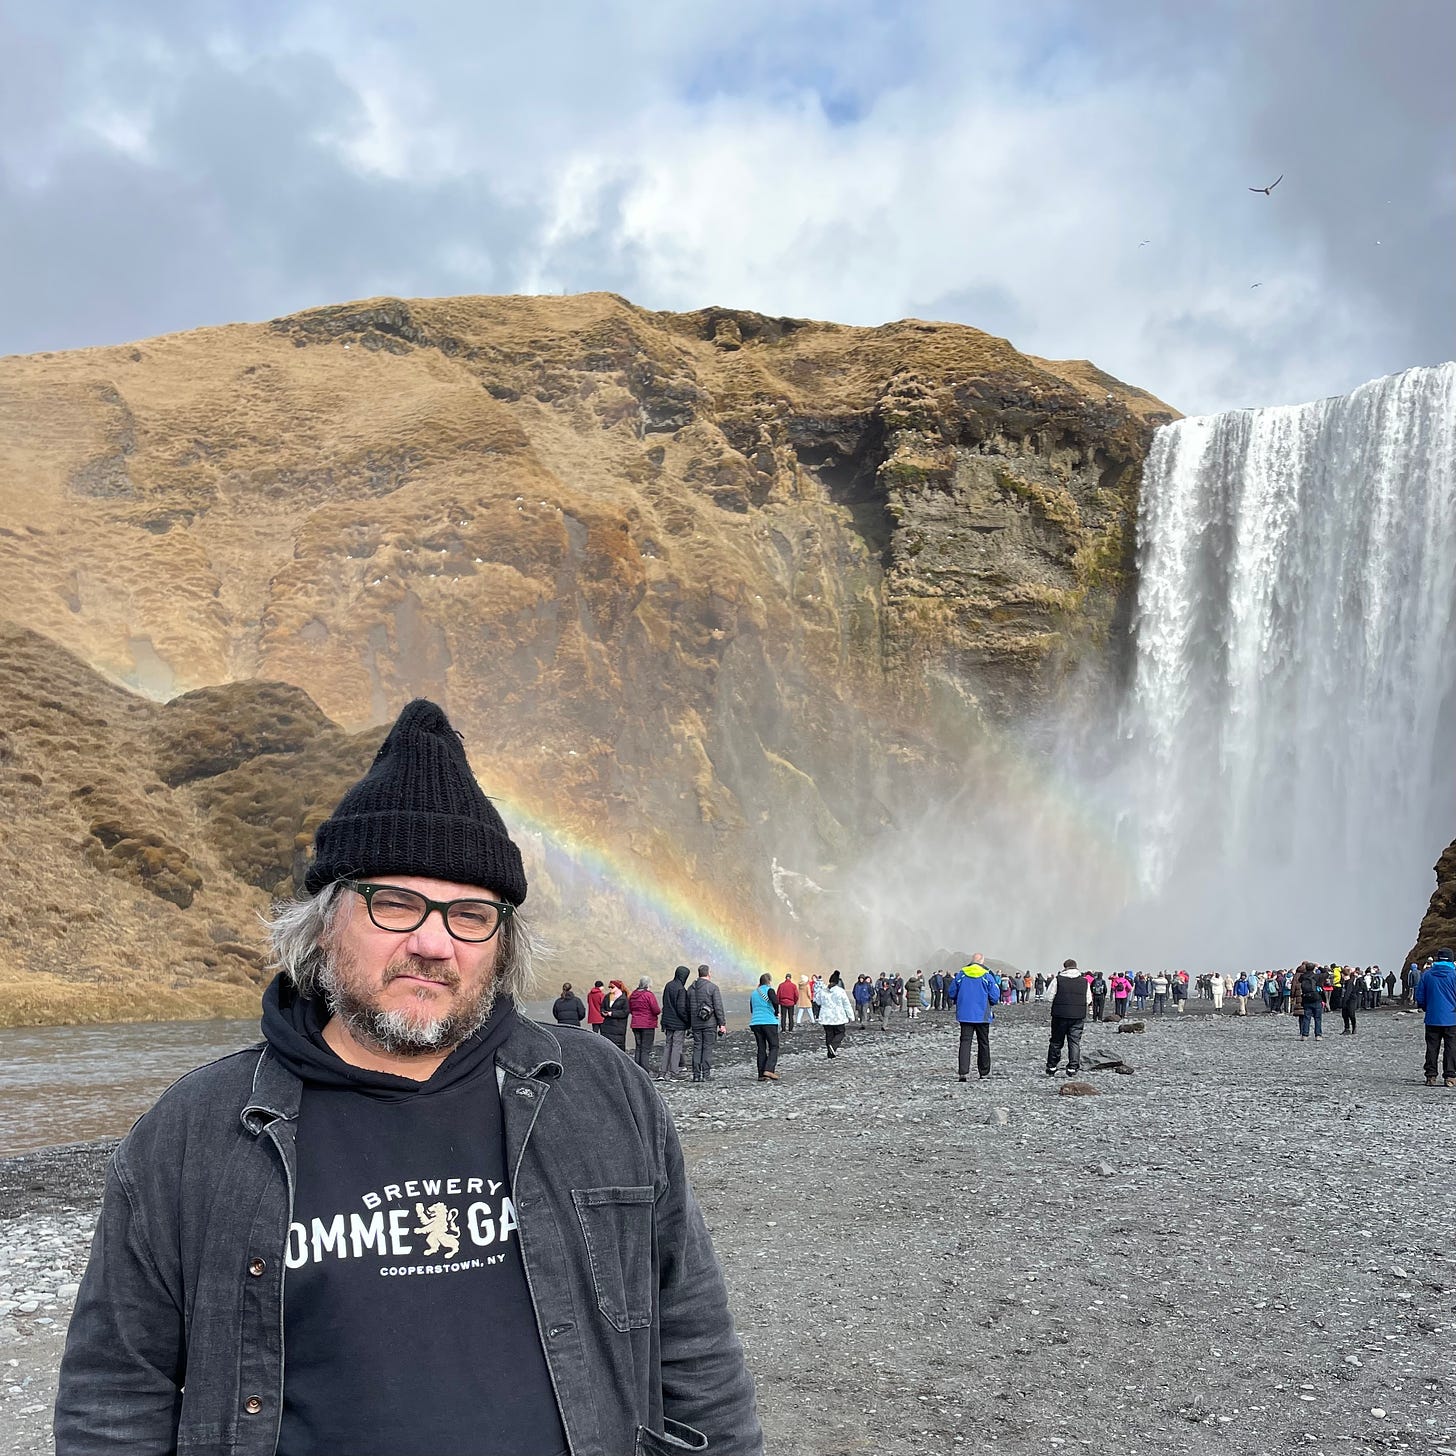 Jeff poses with a deadpan facial expression in front of a waterfall and a rainbow.